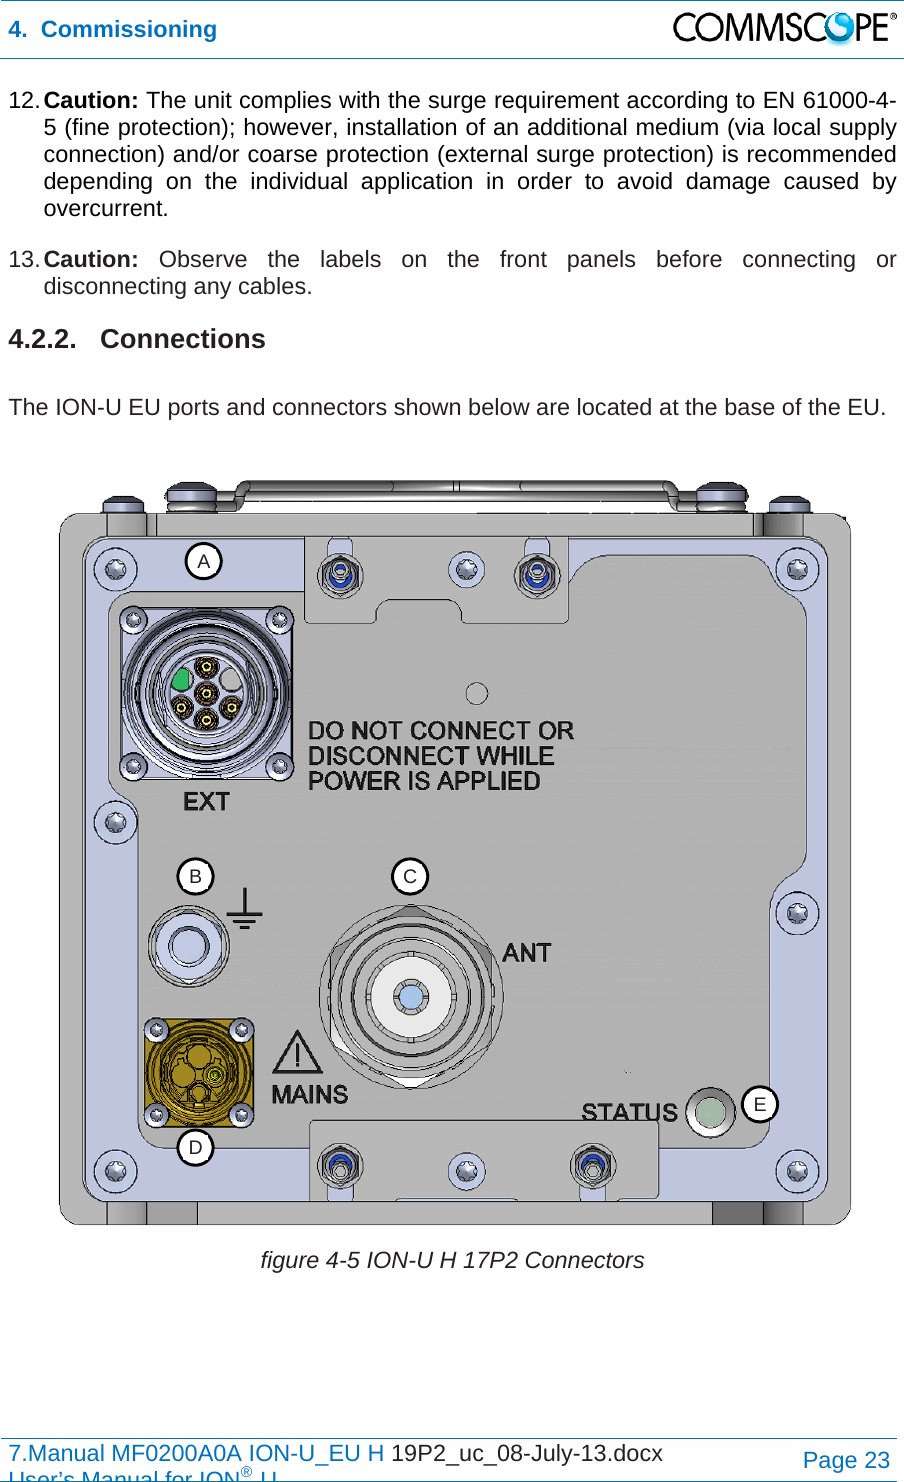 4.  Commissioning  7.Manual MF0200A0A ION-U_EU H 19P2_uc_08-July-13.docx   User’s Manual for ION®UPage 23 12. Caution: The unit complies with the surge requirement according to EN 61000-4-5 (fine protection); however, installation of an additional medium (via local supply connection) and/or coarse protection (external surge protection) is recommended depending on the individual application in order to avoid damage caused by overcurrent. 13. Caution: Observe the labels on the front panels before connecting or disconnecting any cables. 4.2.2. Connections  The ION-U EU ports and connectors shown below are located at the base of the EU.   figure 4-5 ION-U H 17P2 Connectors      A B  CD E 